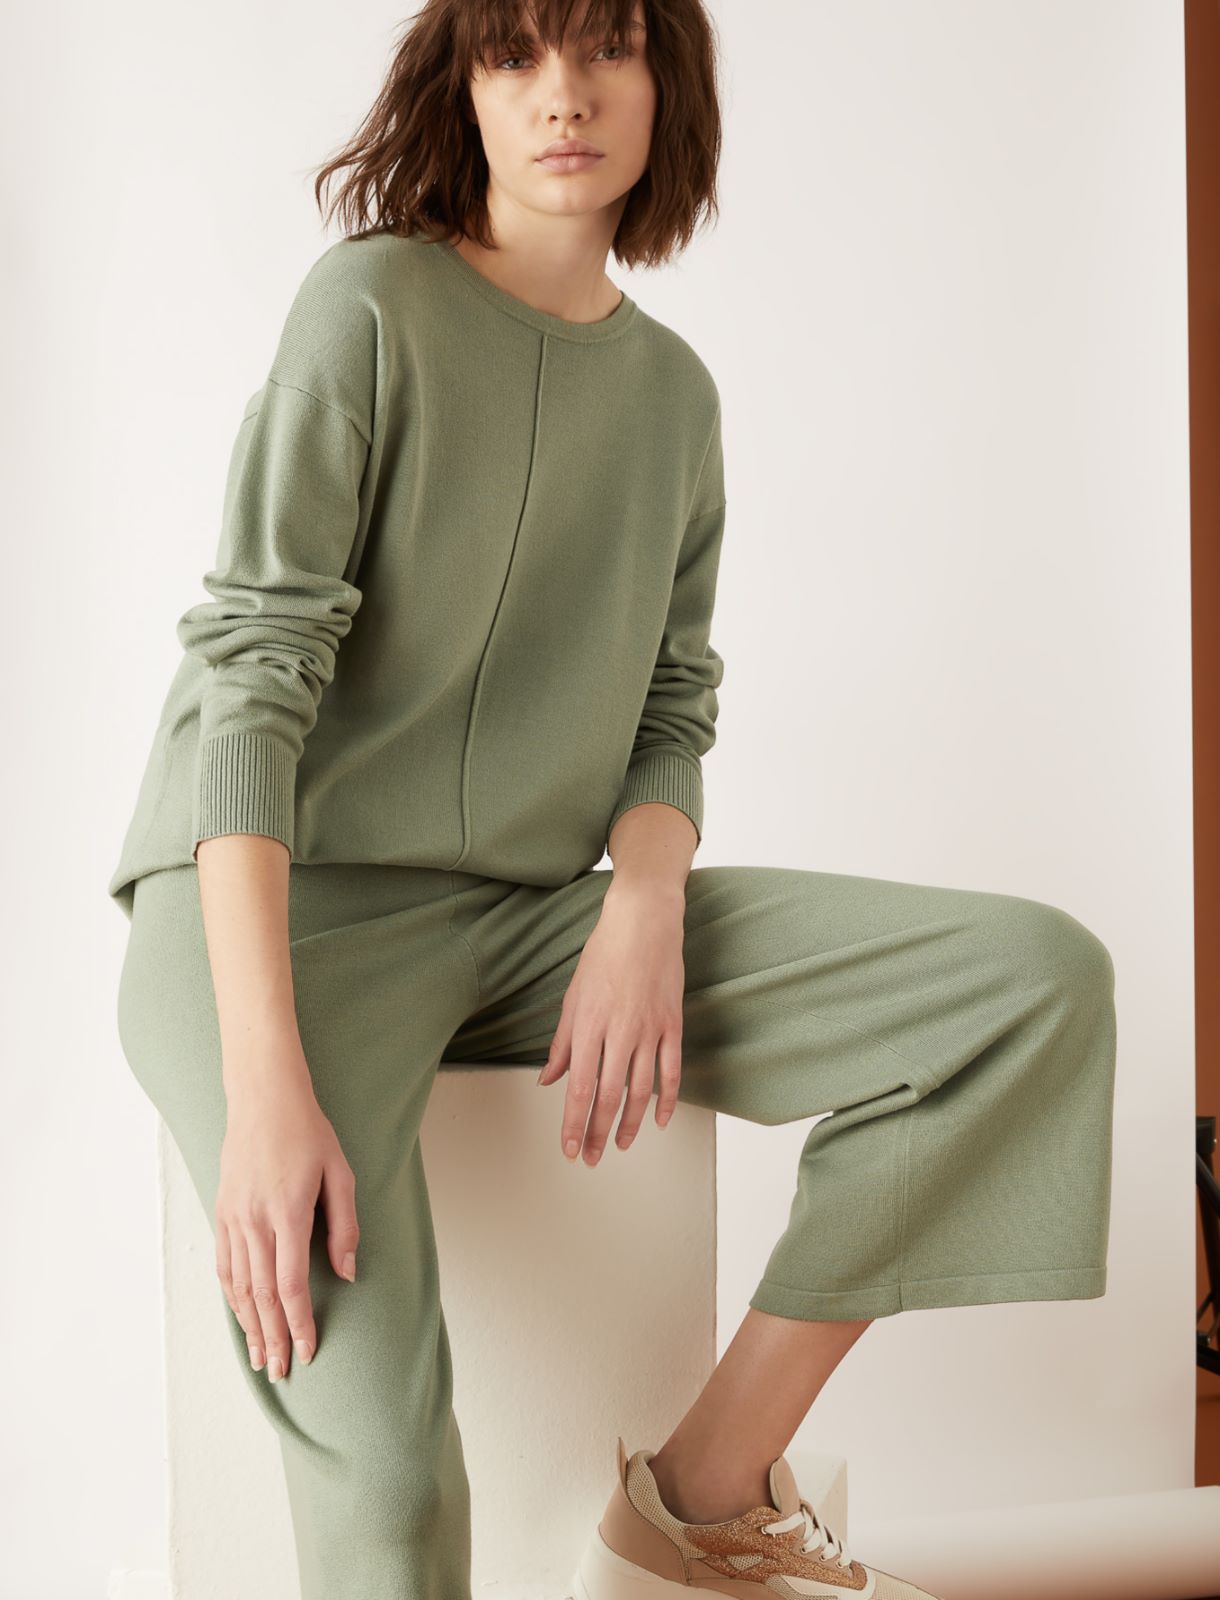 Cropped trousers Marella